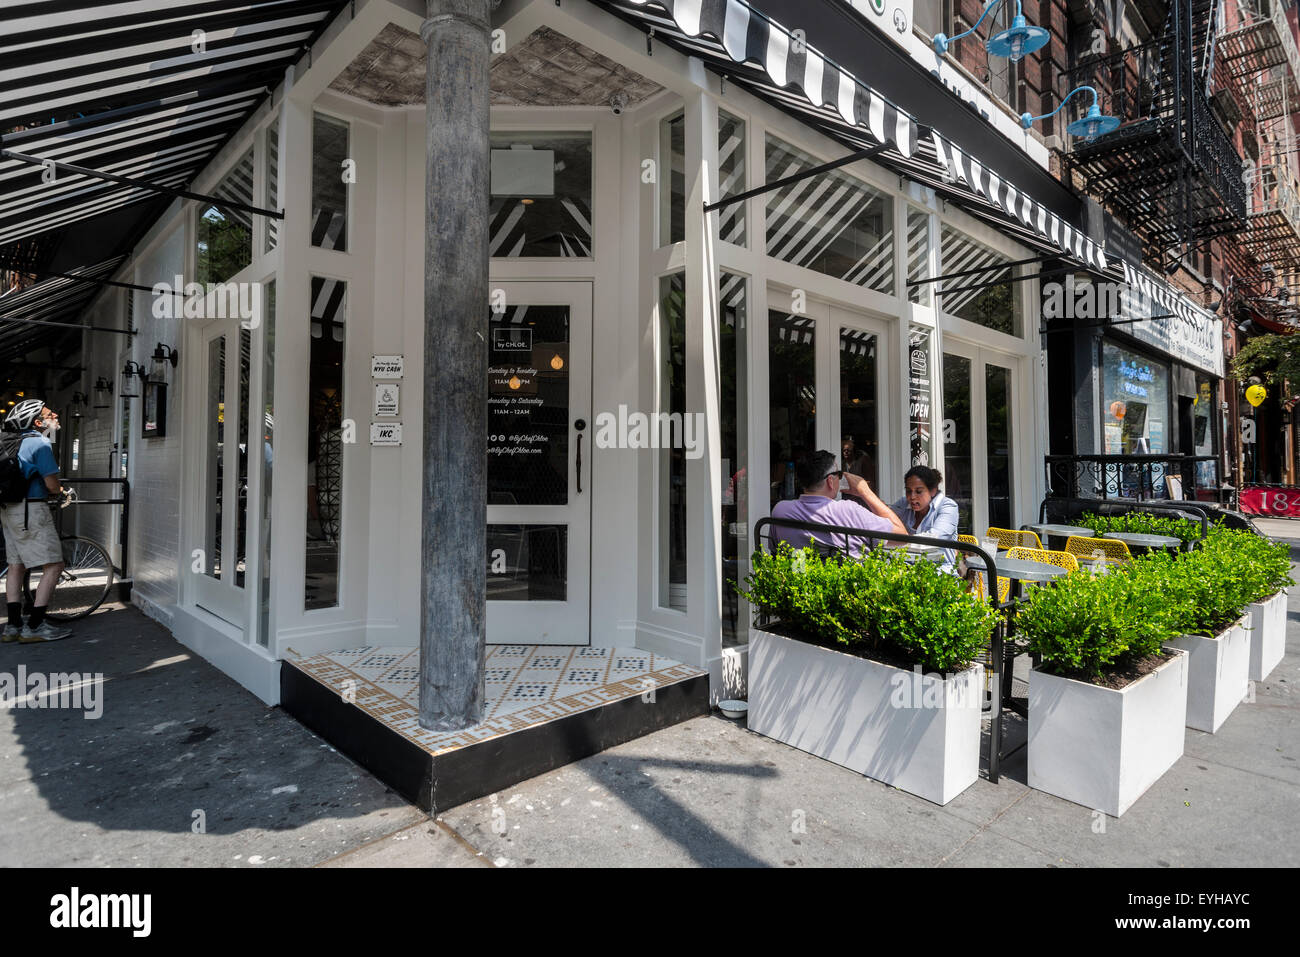 New York, NY 29 July 2015  By Chloe, a fruit and yogurt parlour, opens at the corner of Bleecker and MacDougal. The site previously housed Caffe Ciao, and Caffe Borgia Stock Photo